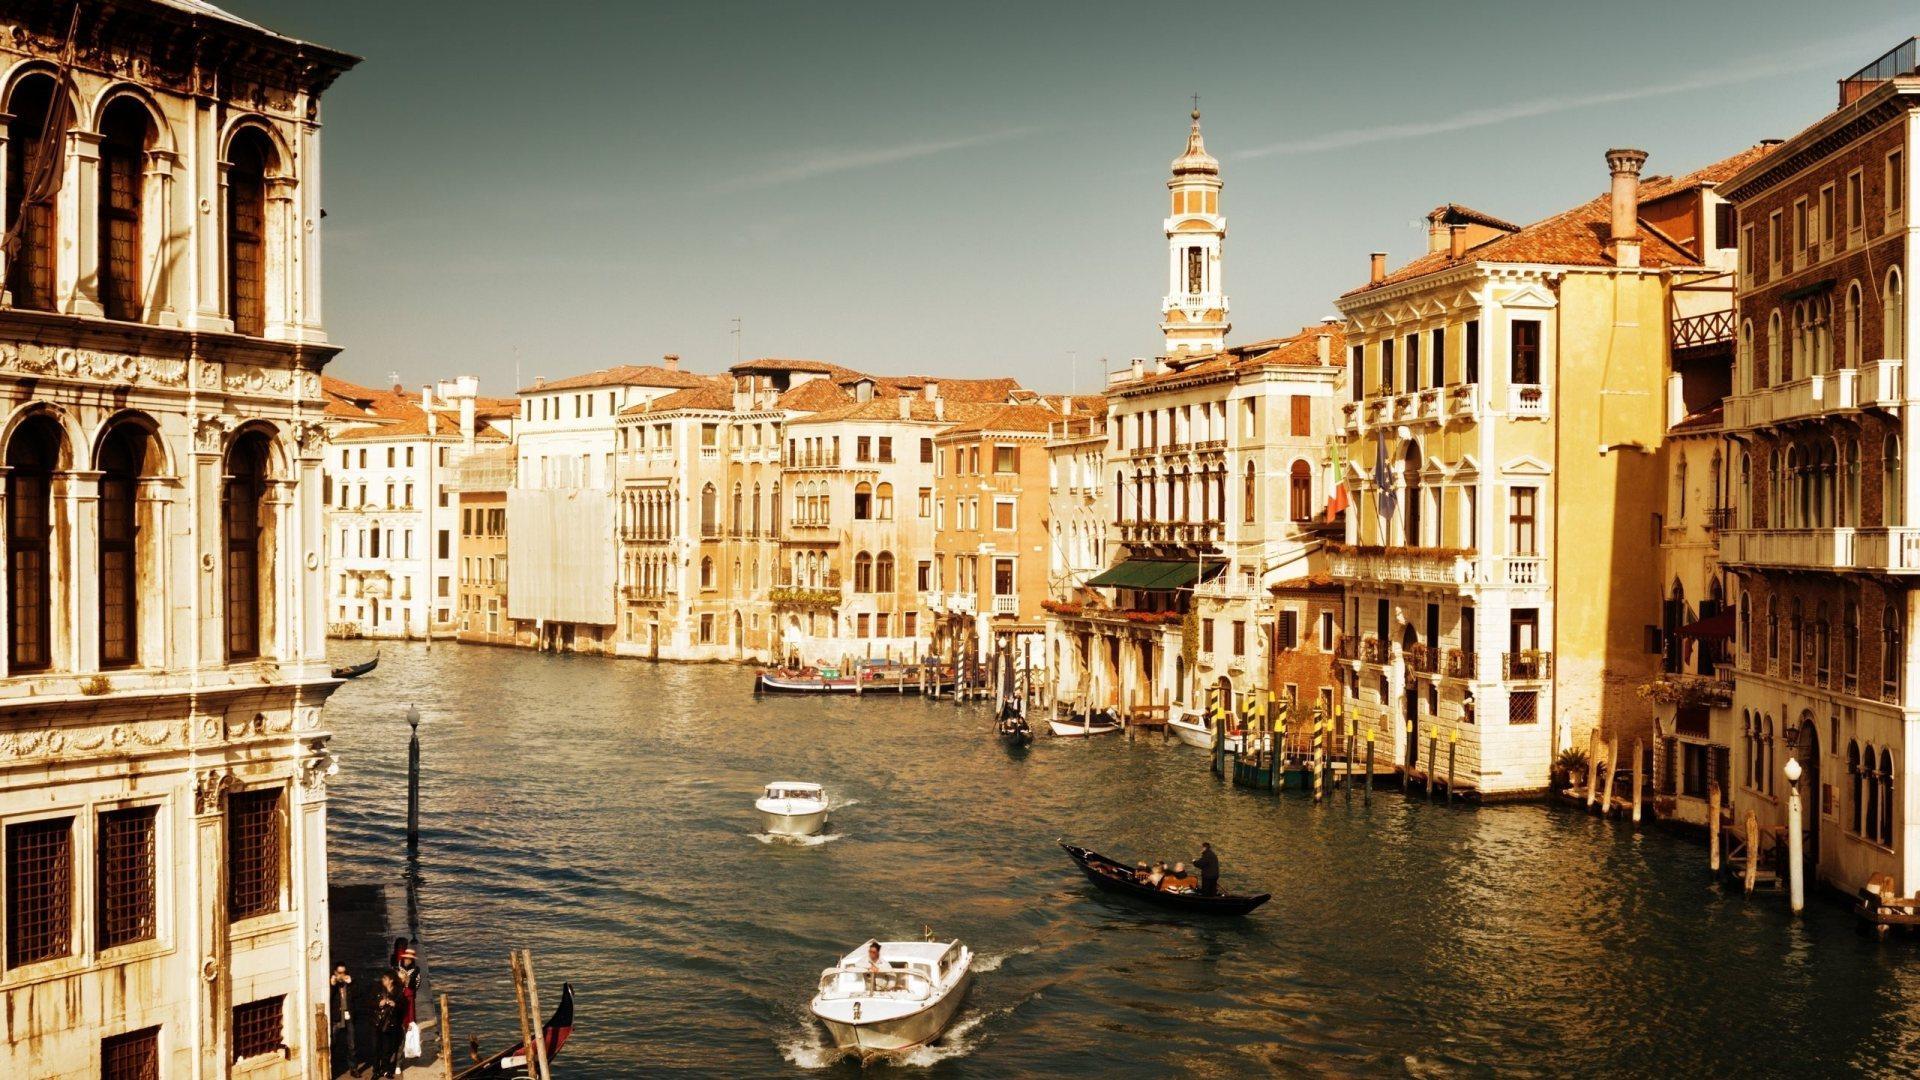 Venice (The Water City) HD Wallpaper Free Download